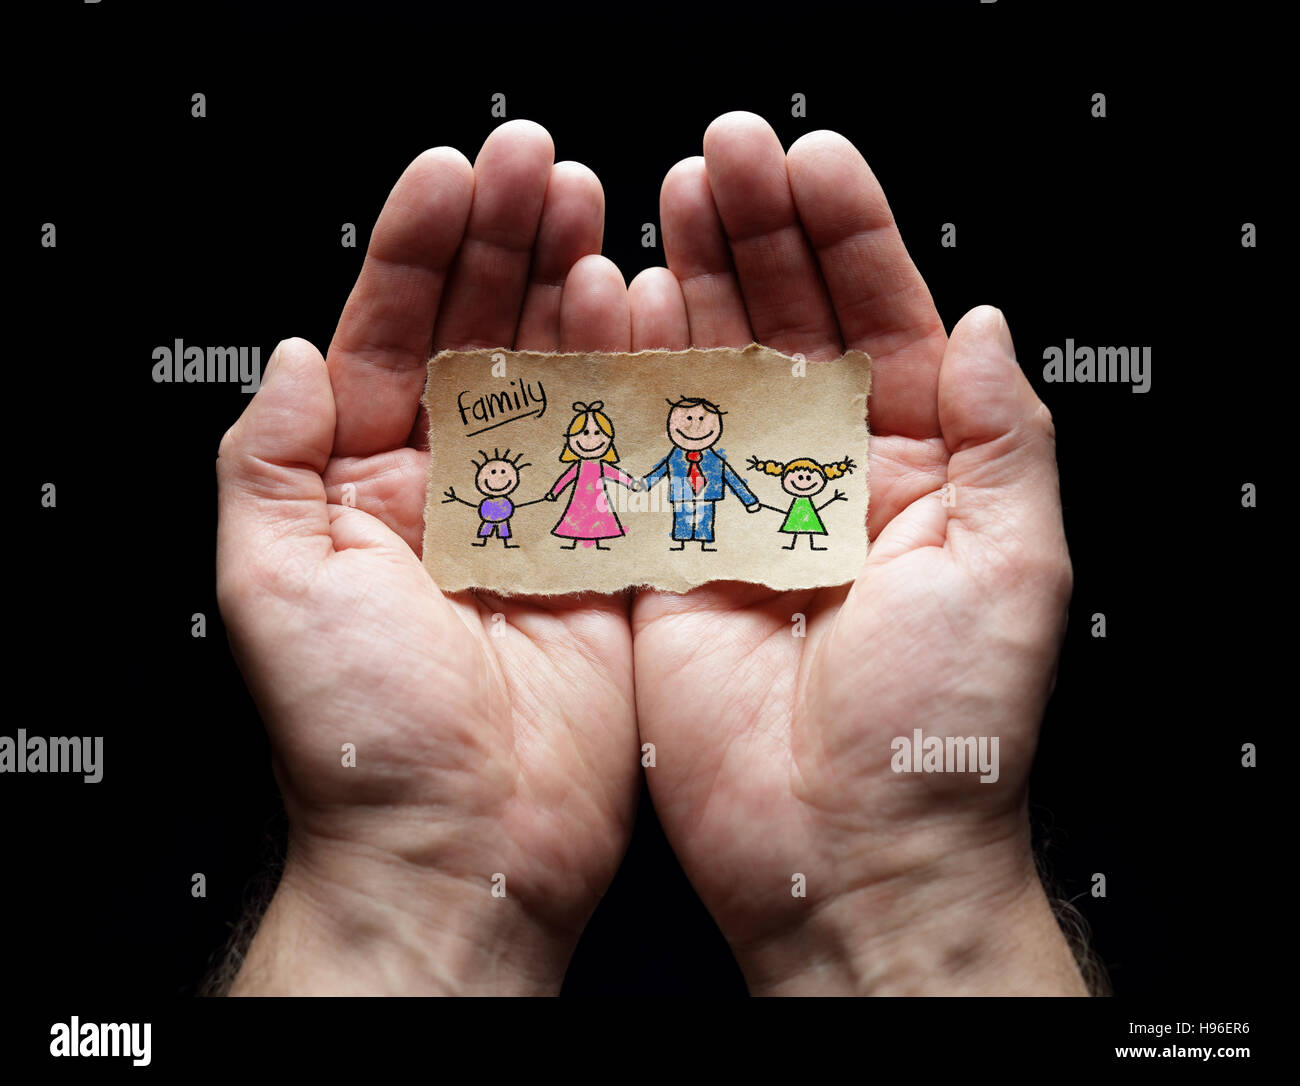 Family care with the protection of cupped hands, concept for love, help, assistance, security and caring Stock Photo